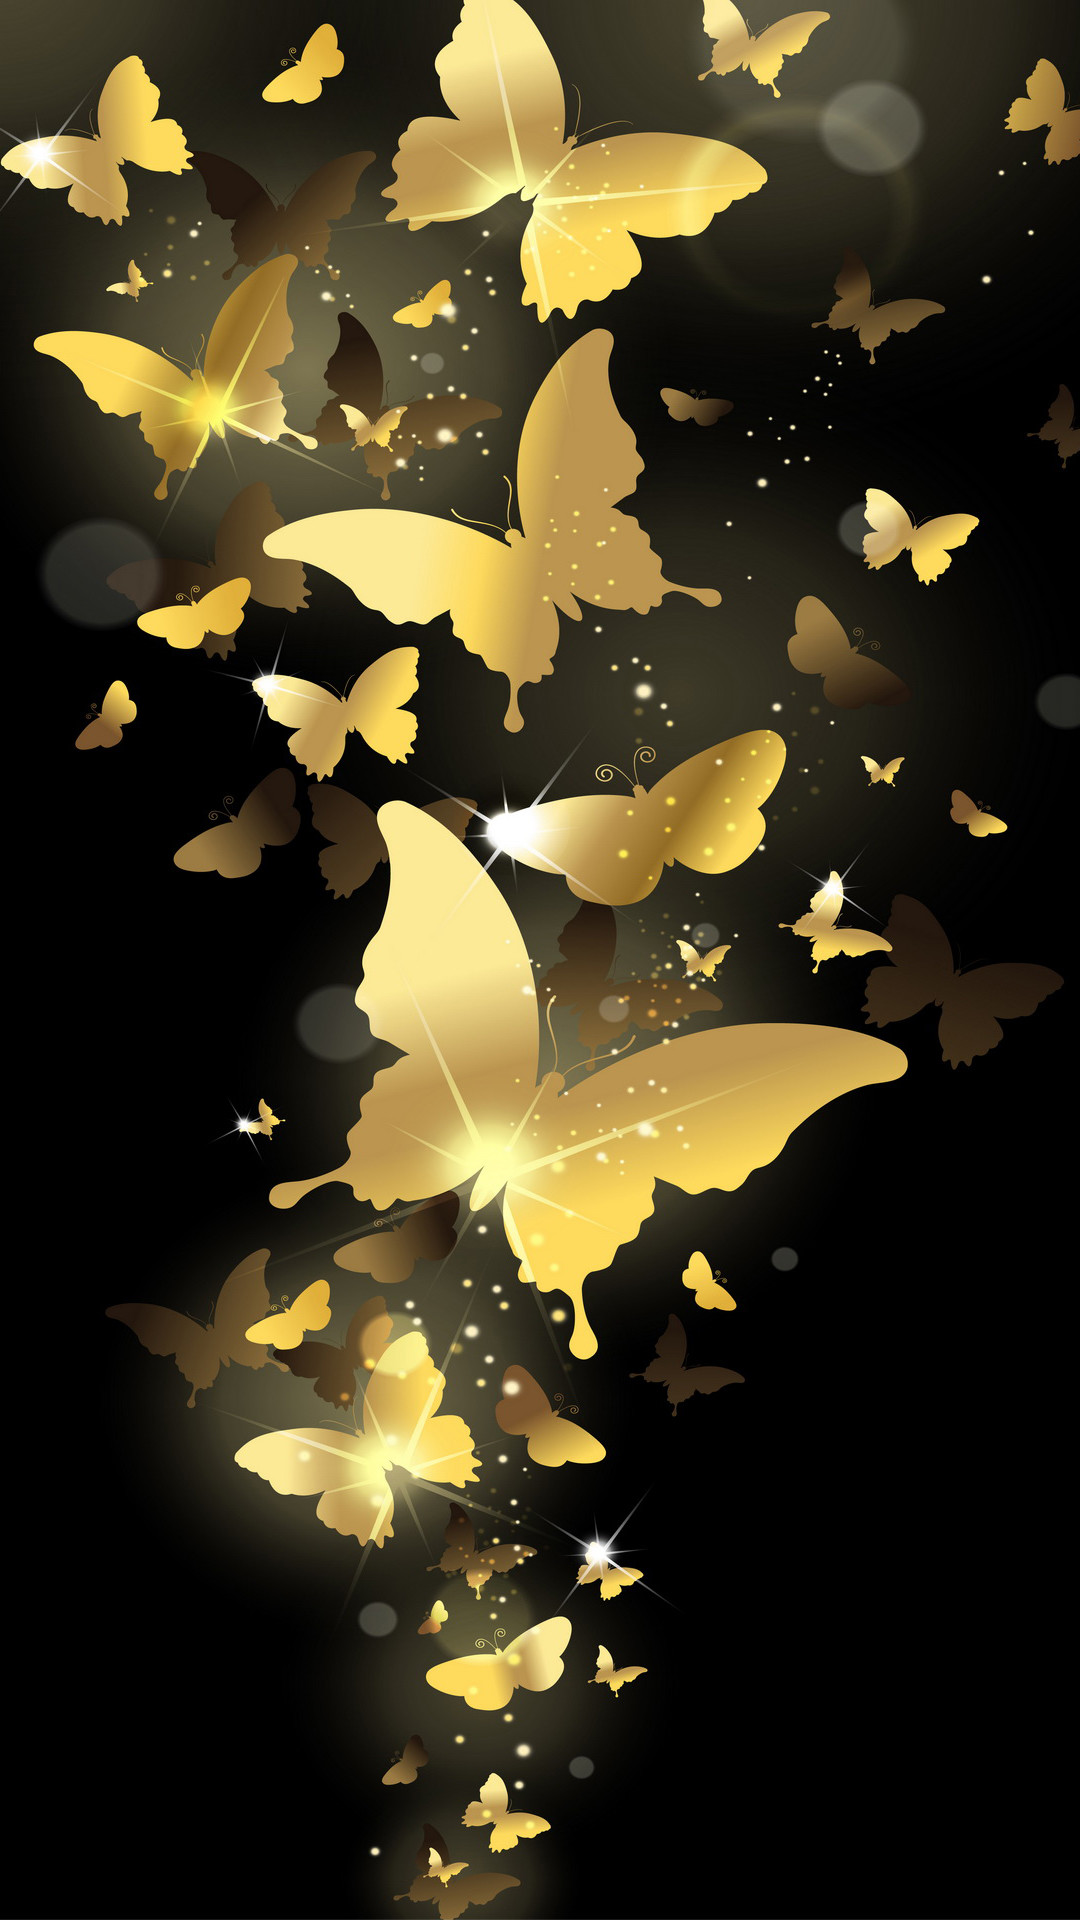 1080x1920 Free Butterfly Wallpaper HD for Android APK Download For Android